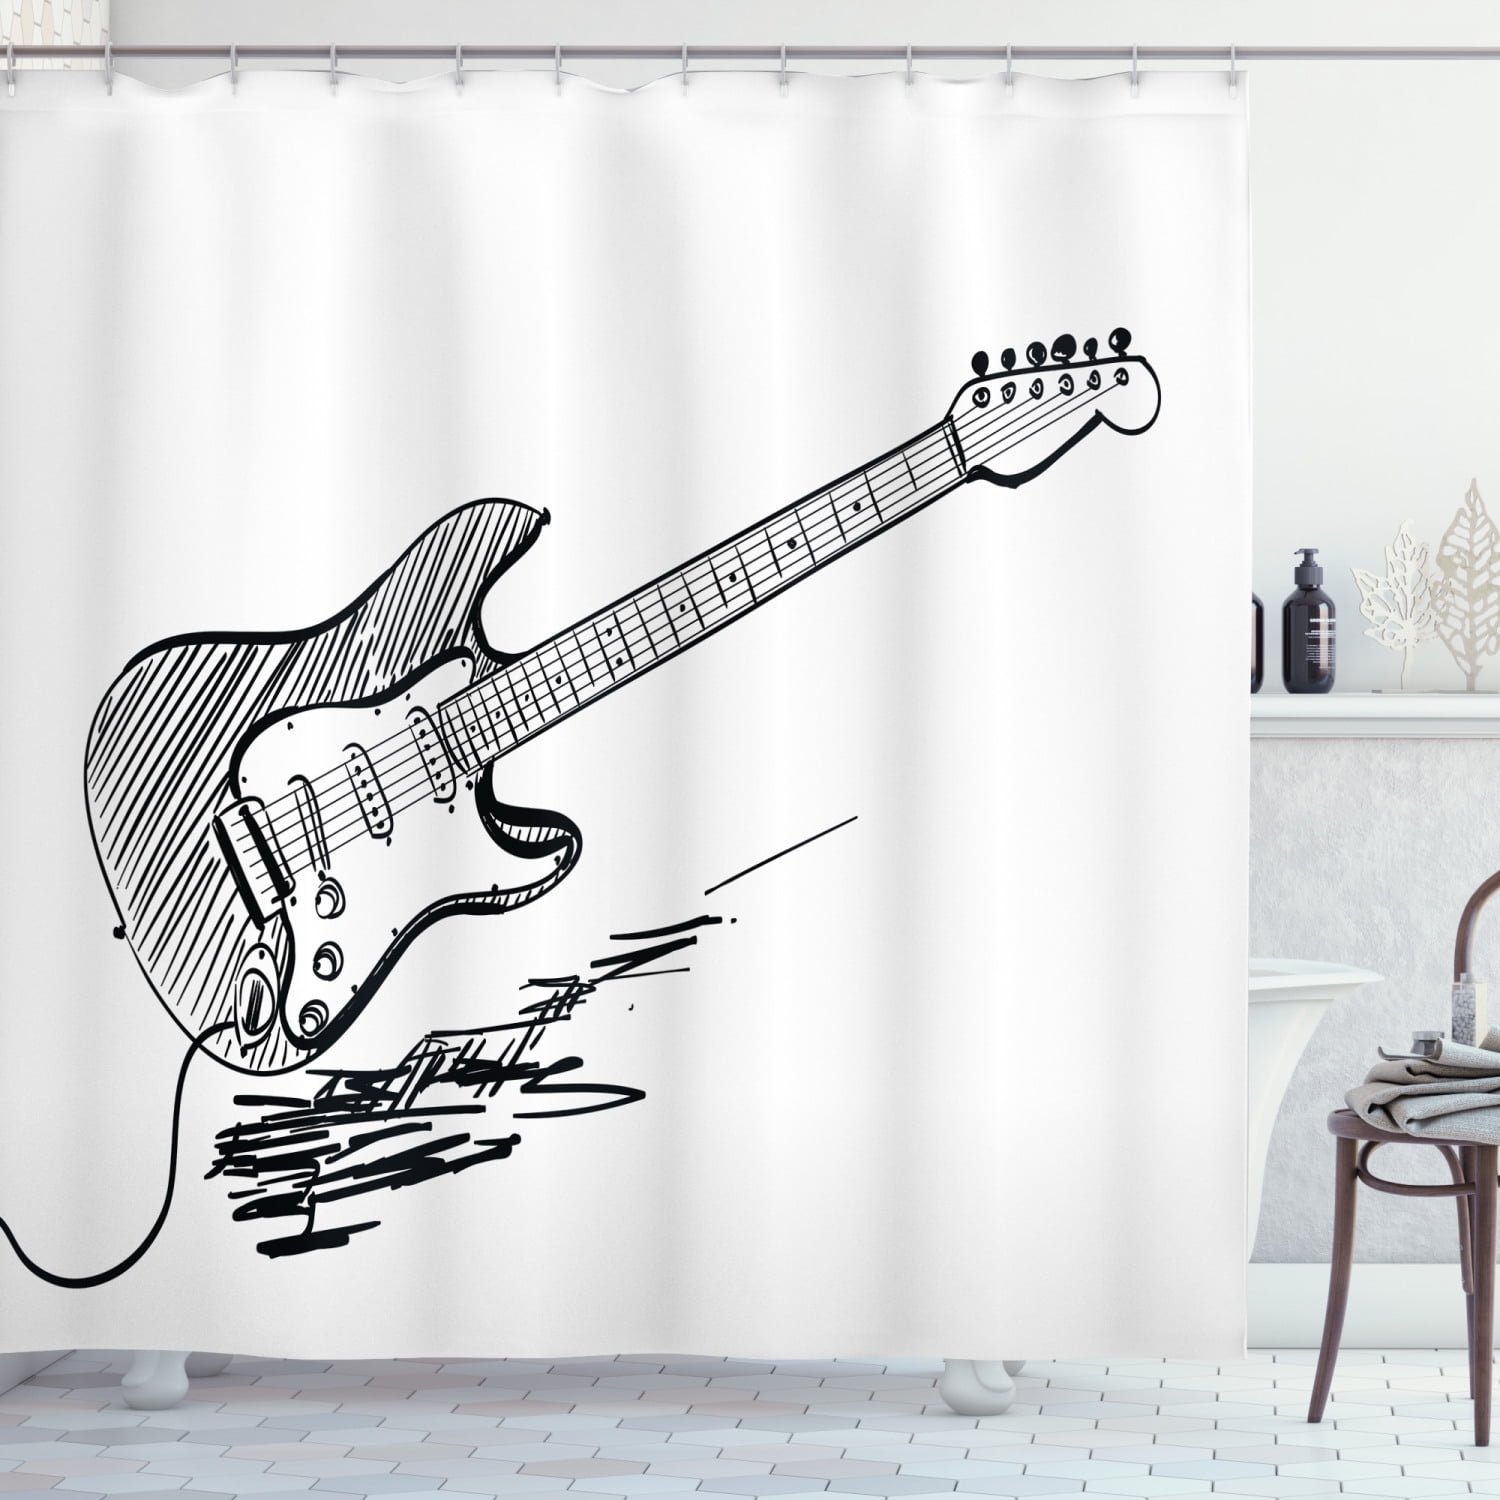 Cat playing guitar Shower Curtain Bathroom Decor Fabric & 12hooks 71*71inches